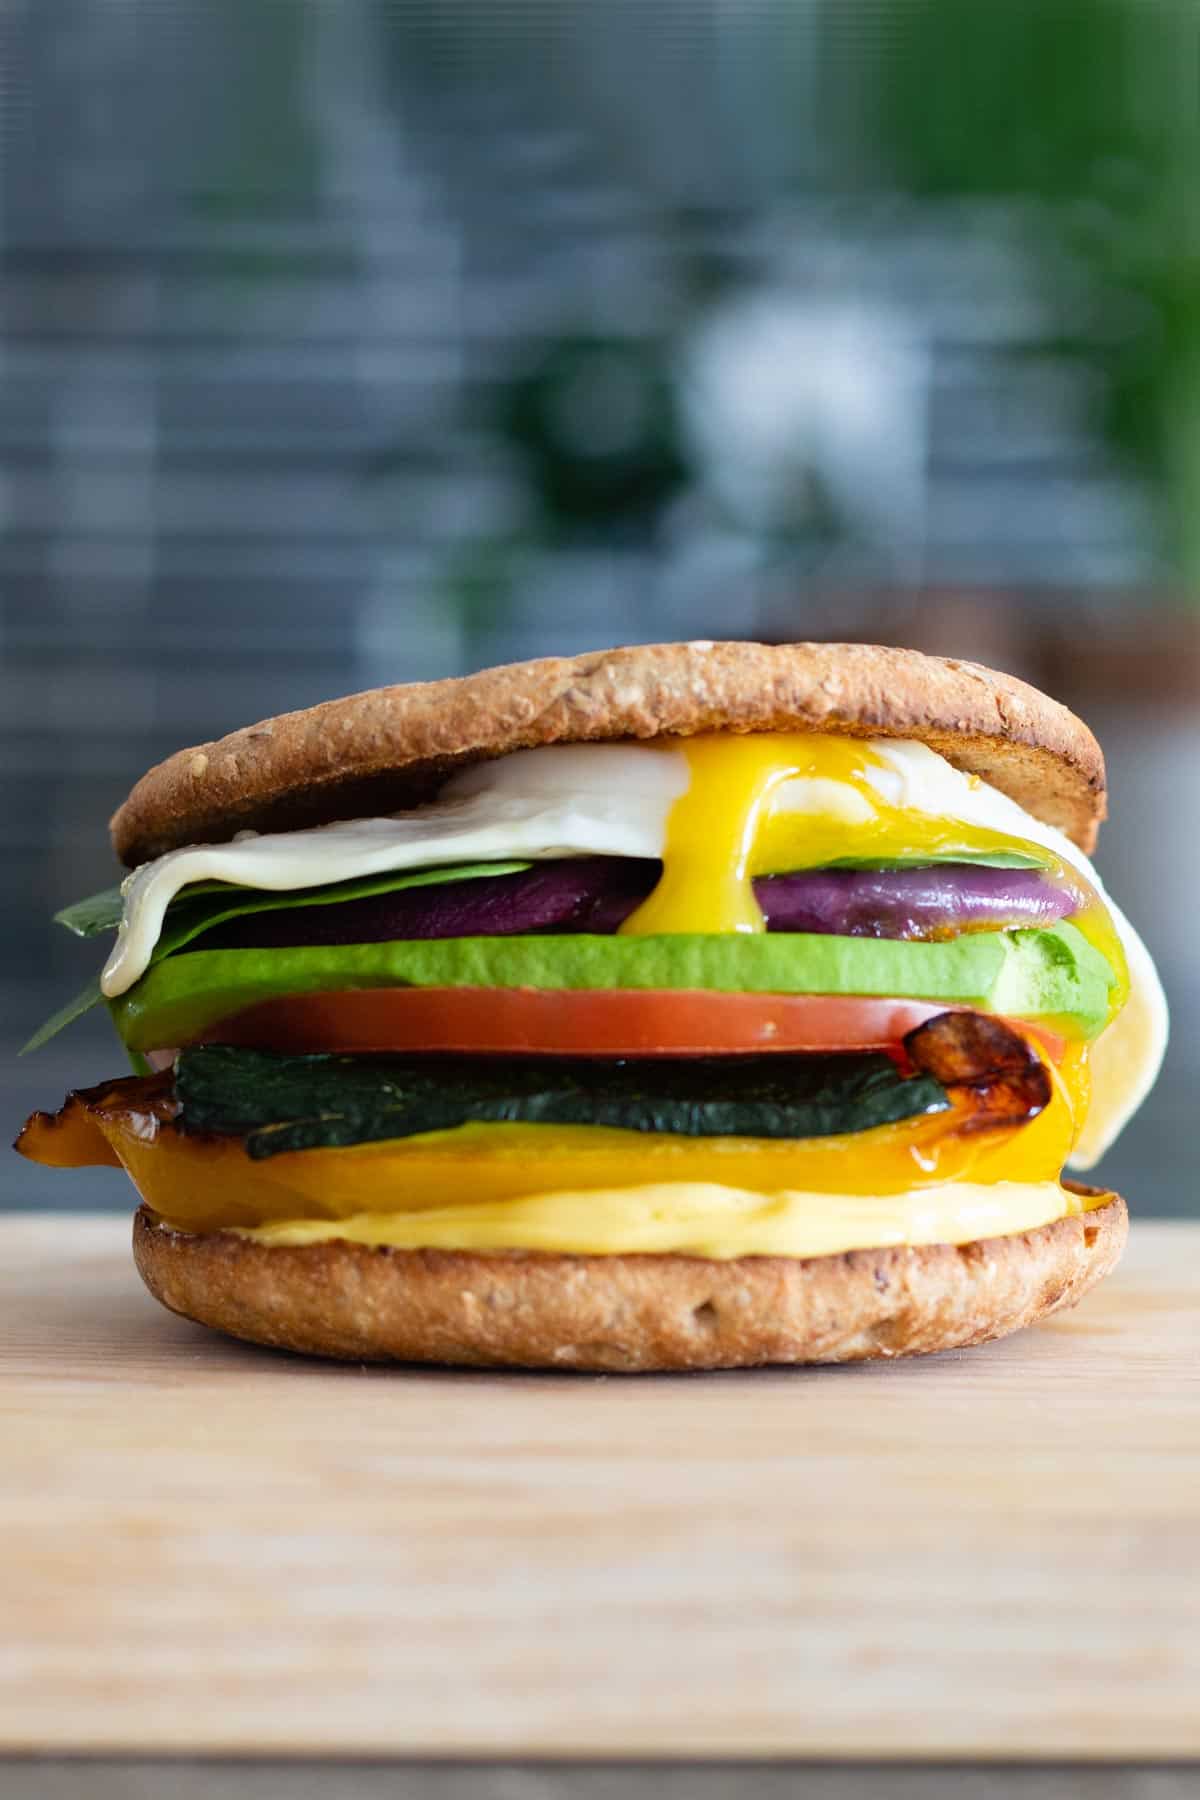 multi-layered sandwich with different colored vegetables and a fried egg on top on a cutting board